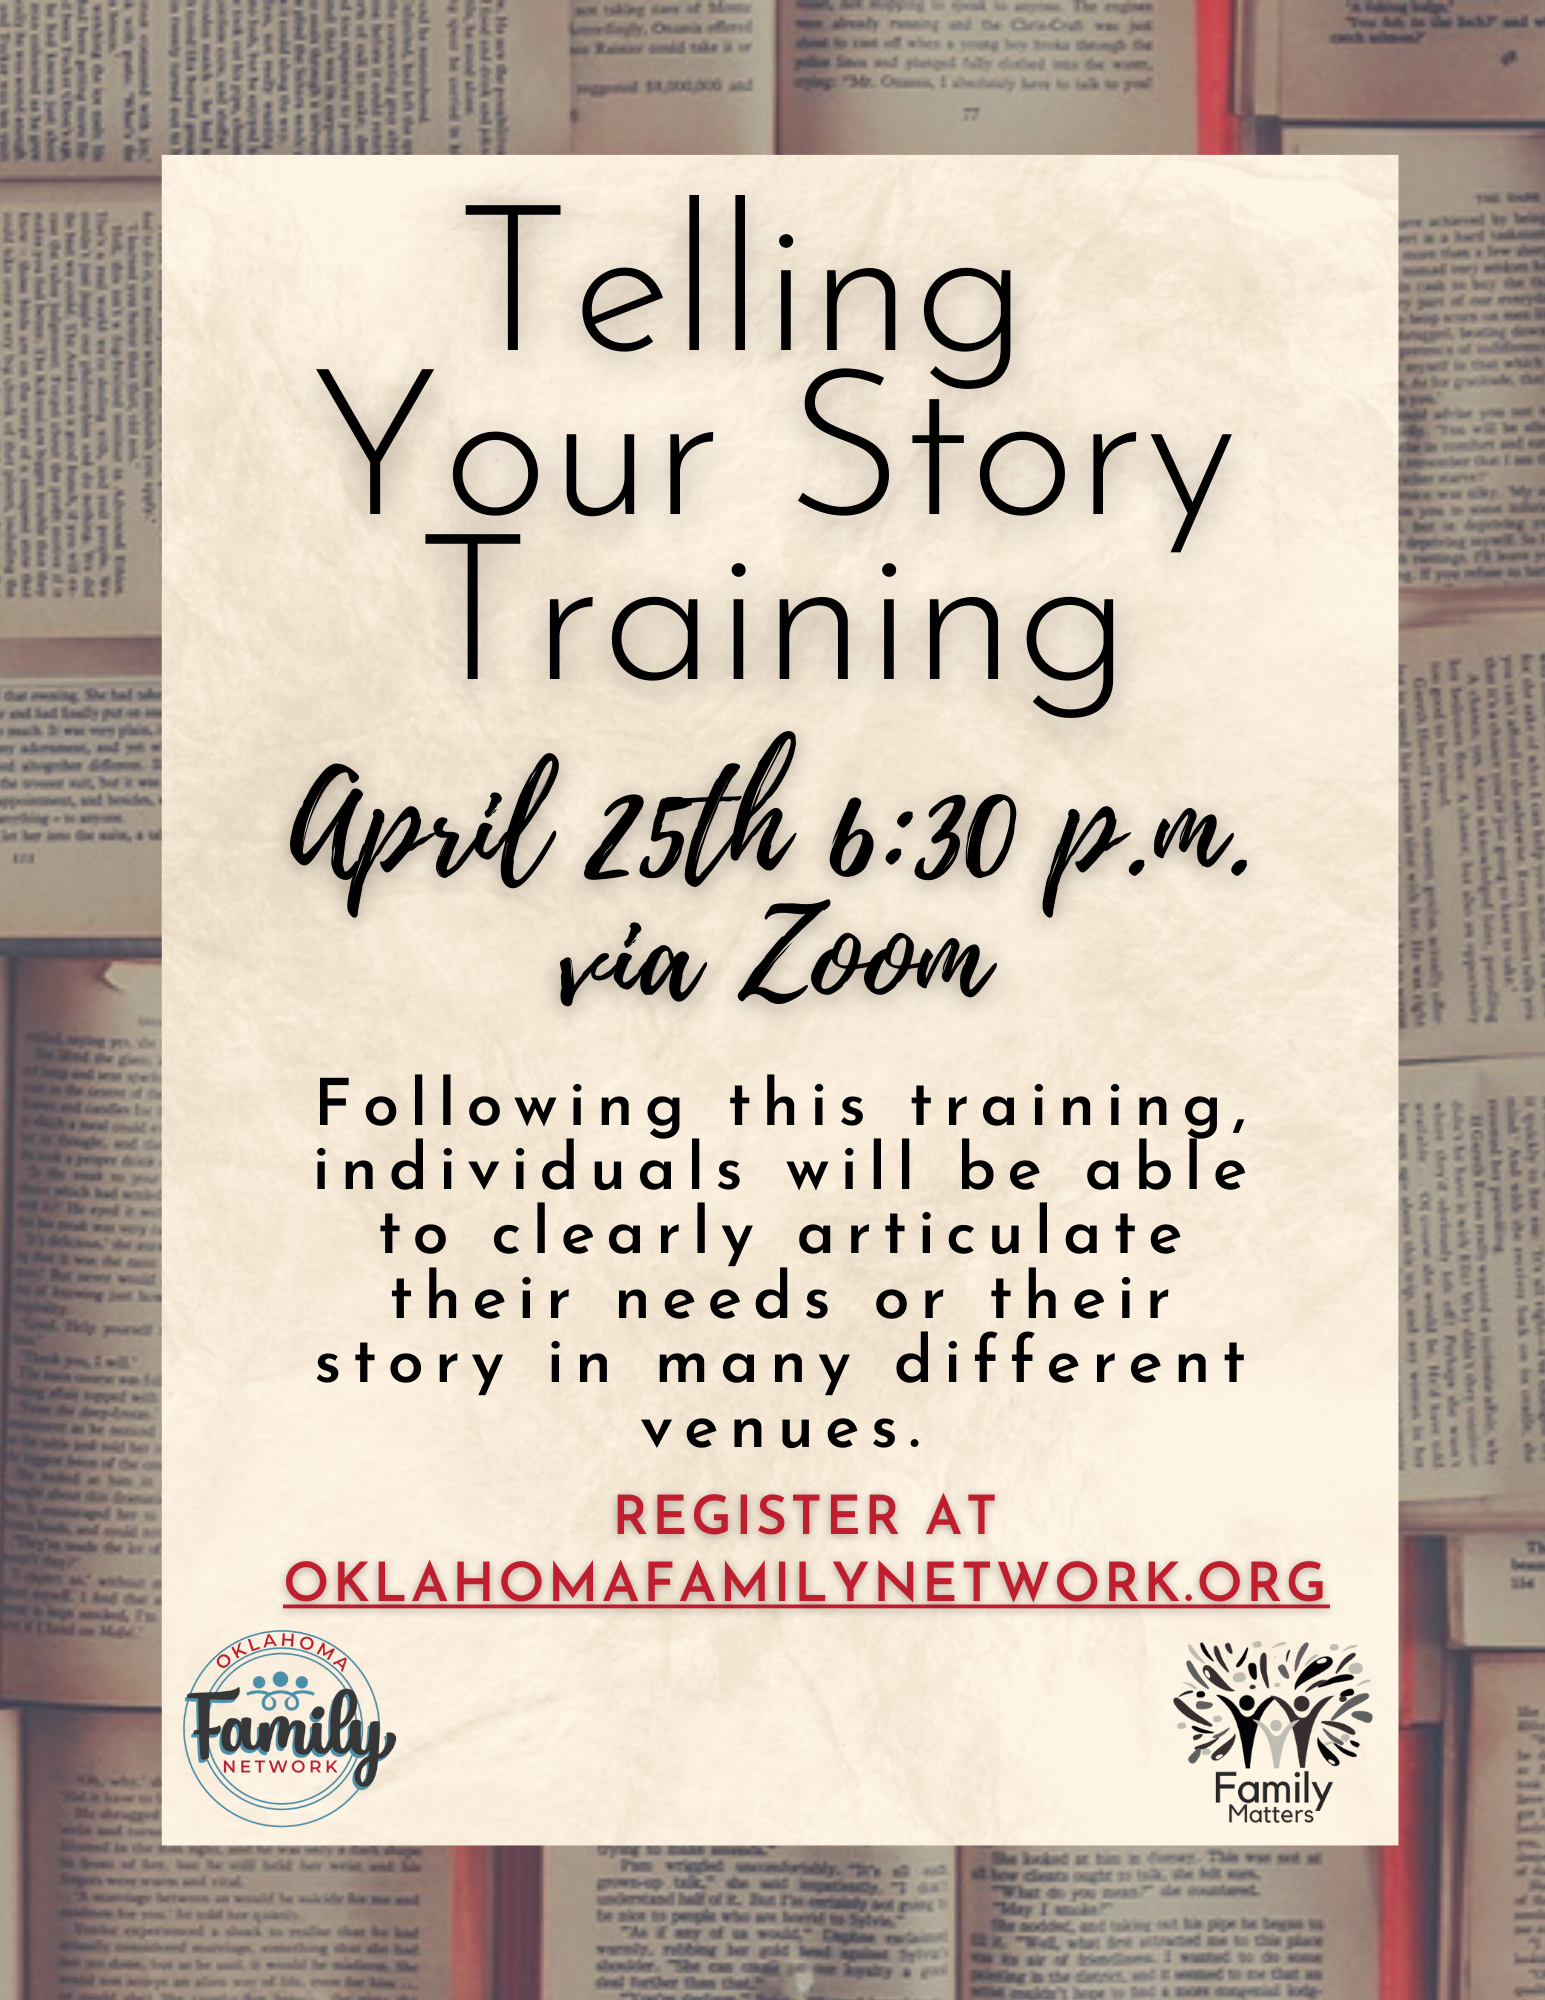 Telling your story training April 25th at 6:30 p.m. via zoom